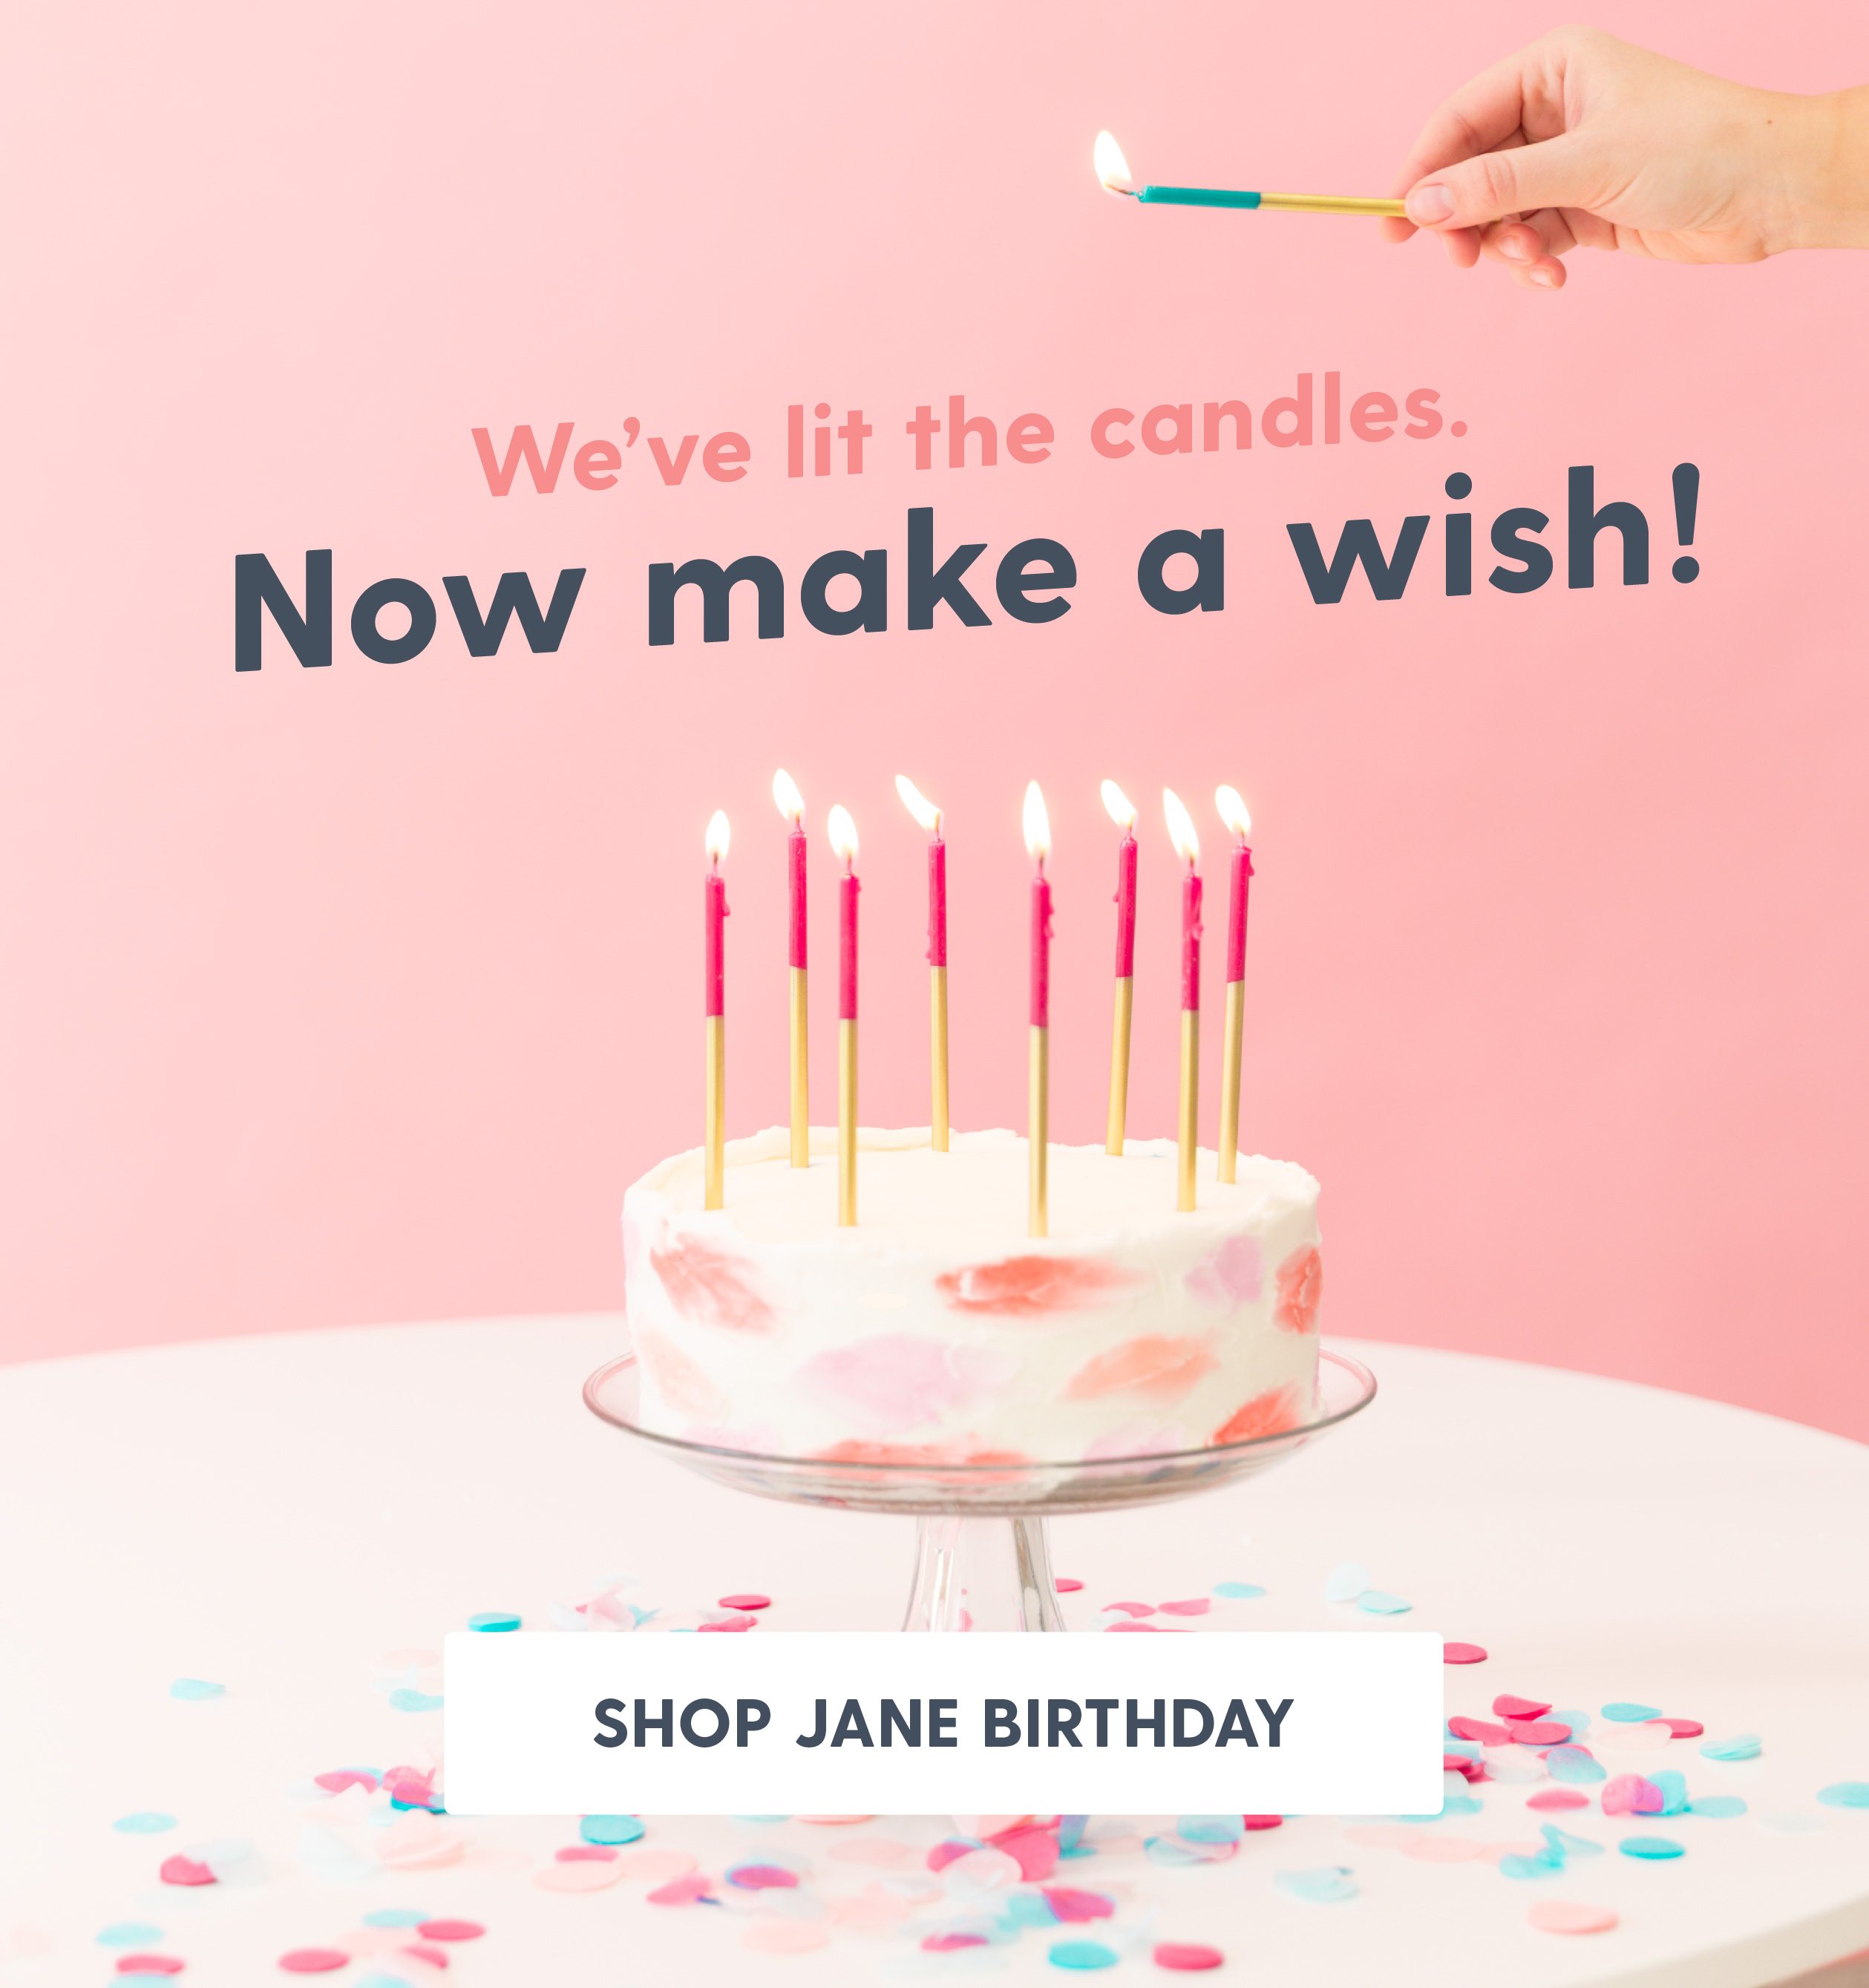 We've lit the candles. Now make a wish! Shop Jane Birthday.